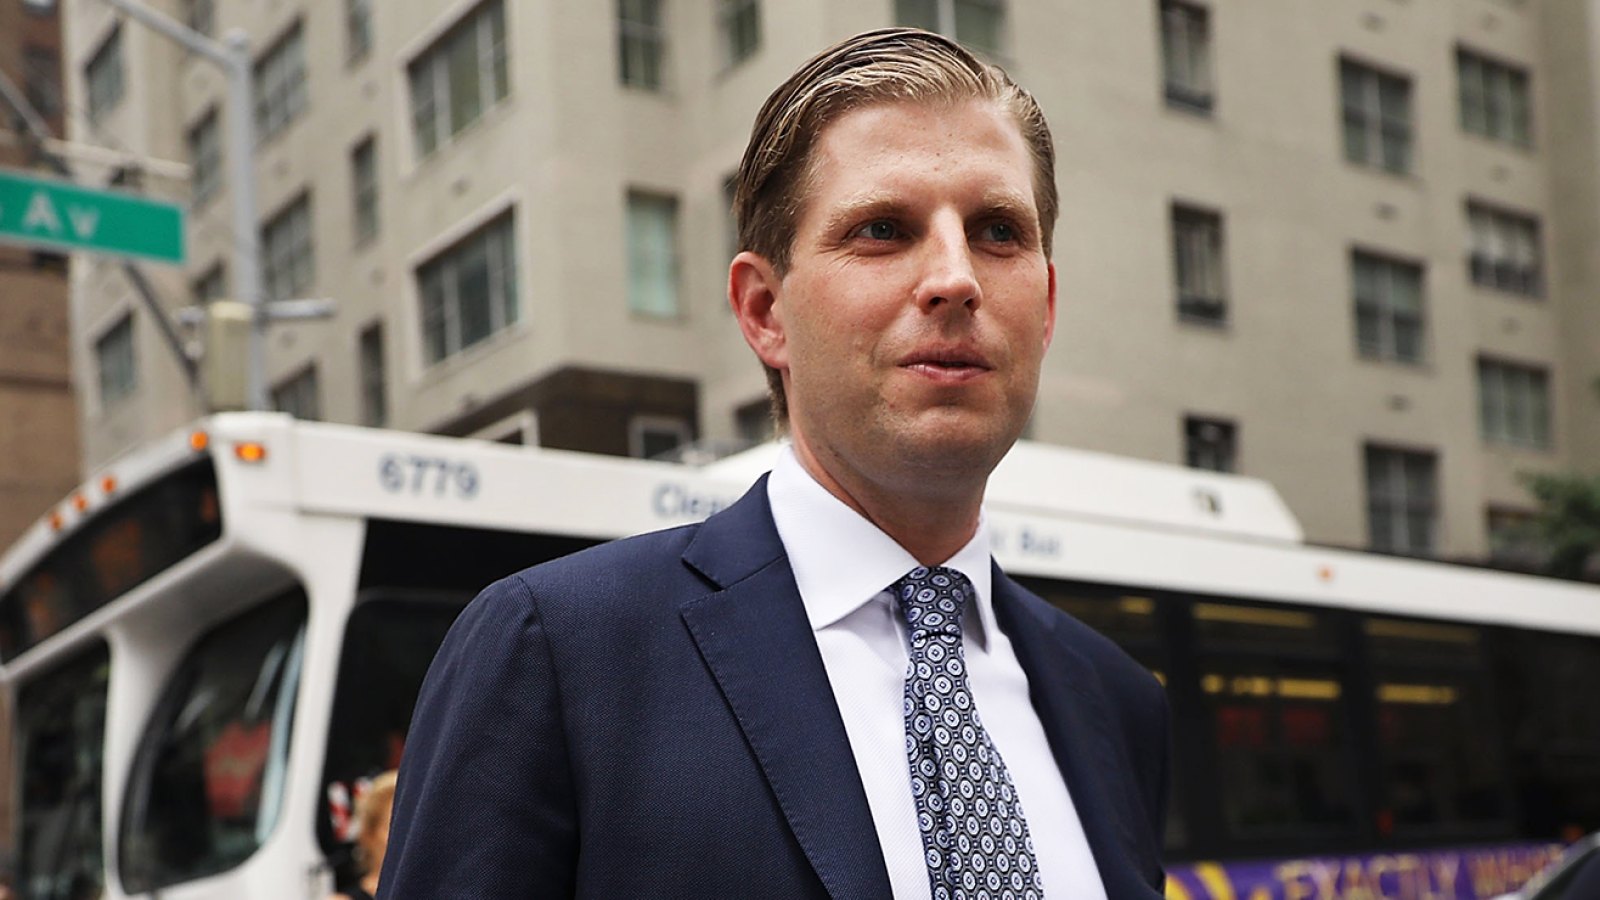 Twitter Has a Field Day With Eric Trump’s Tweet About a ‘Snake in the Grass’